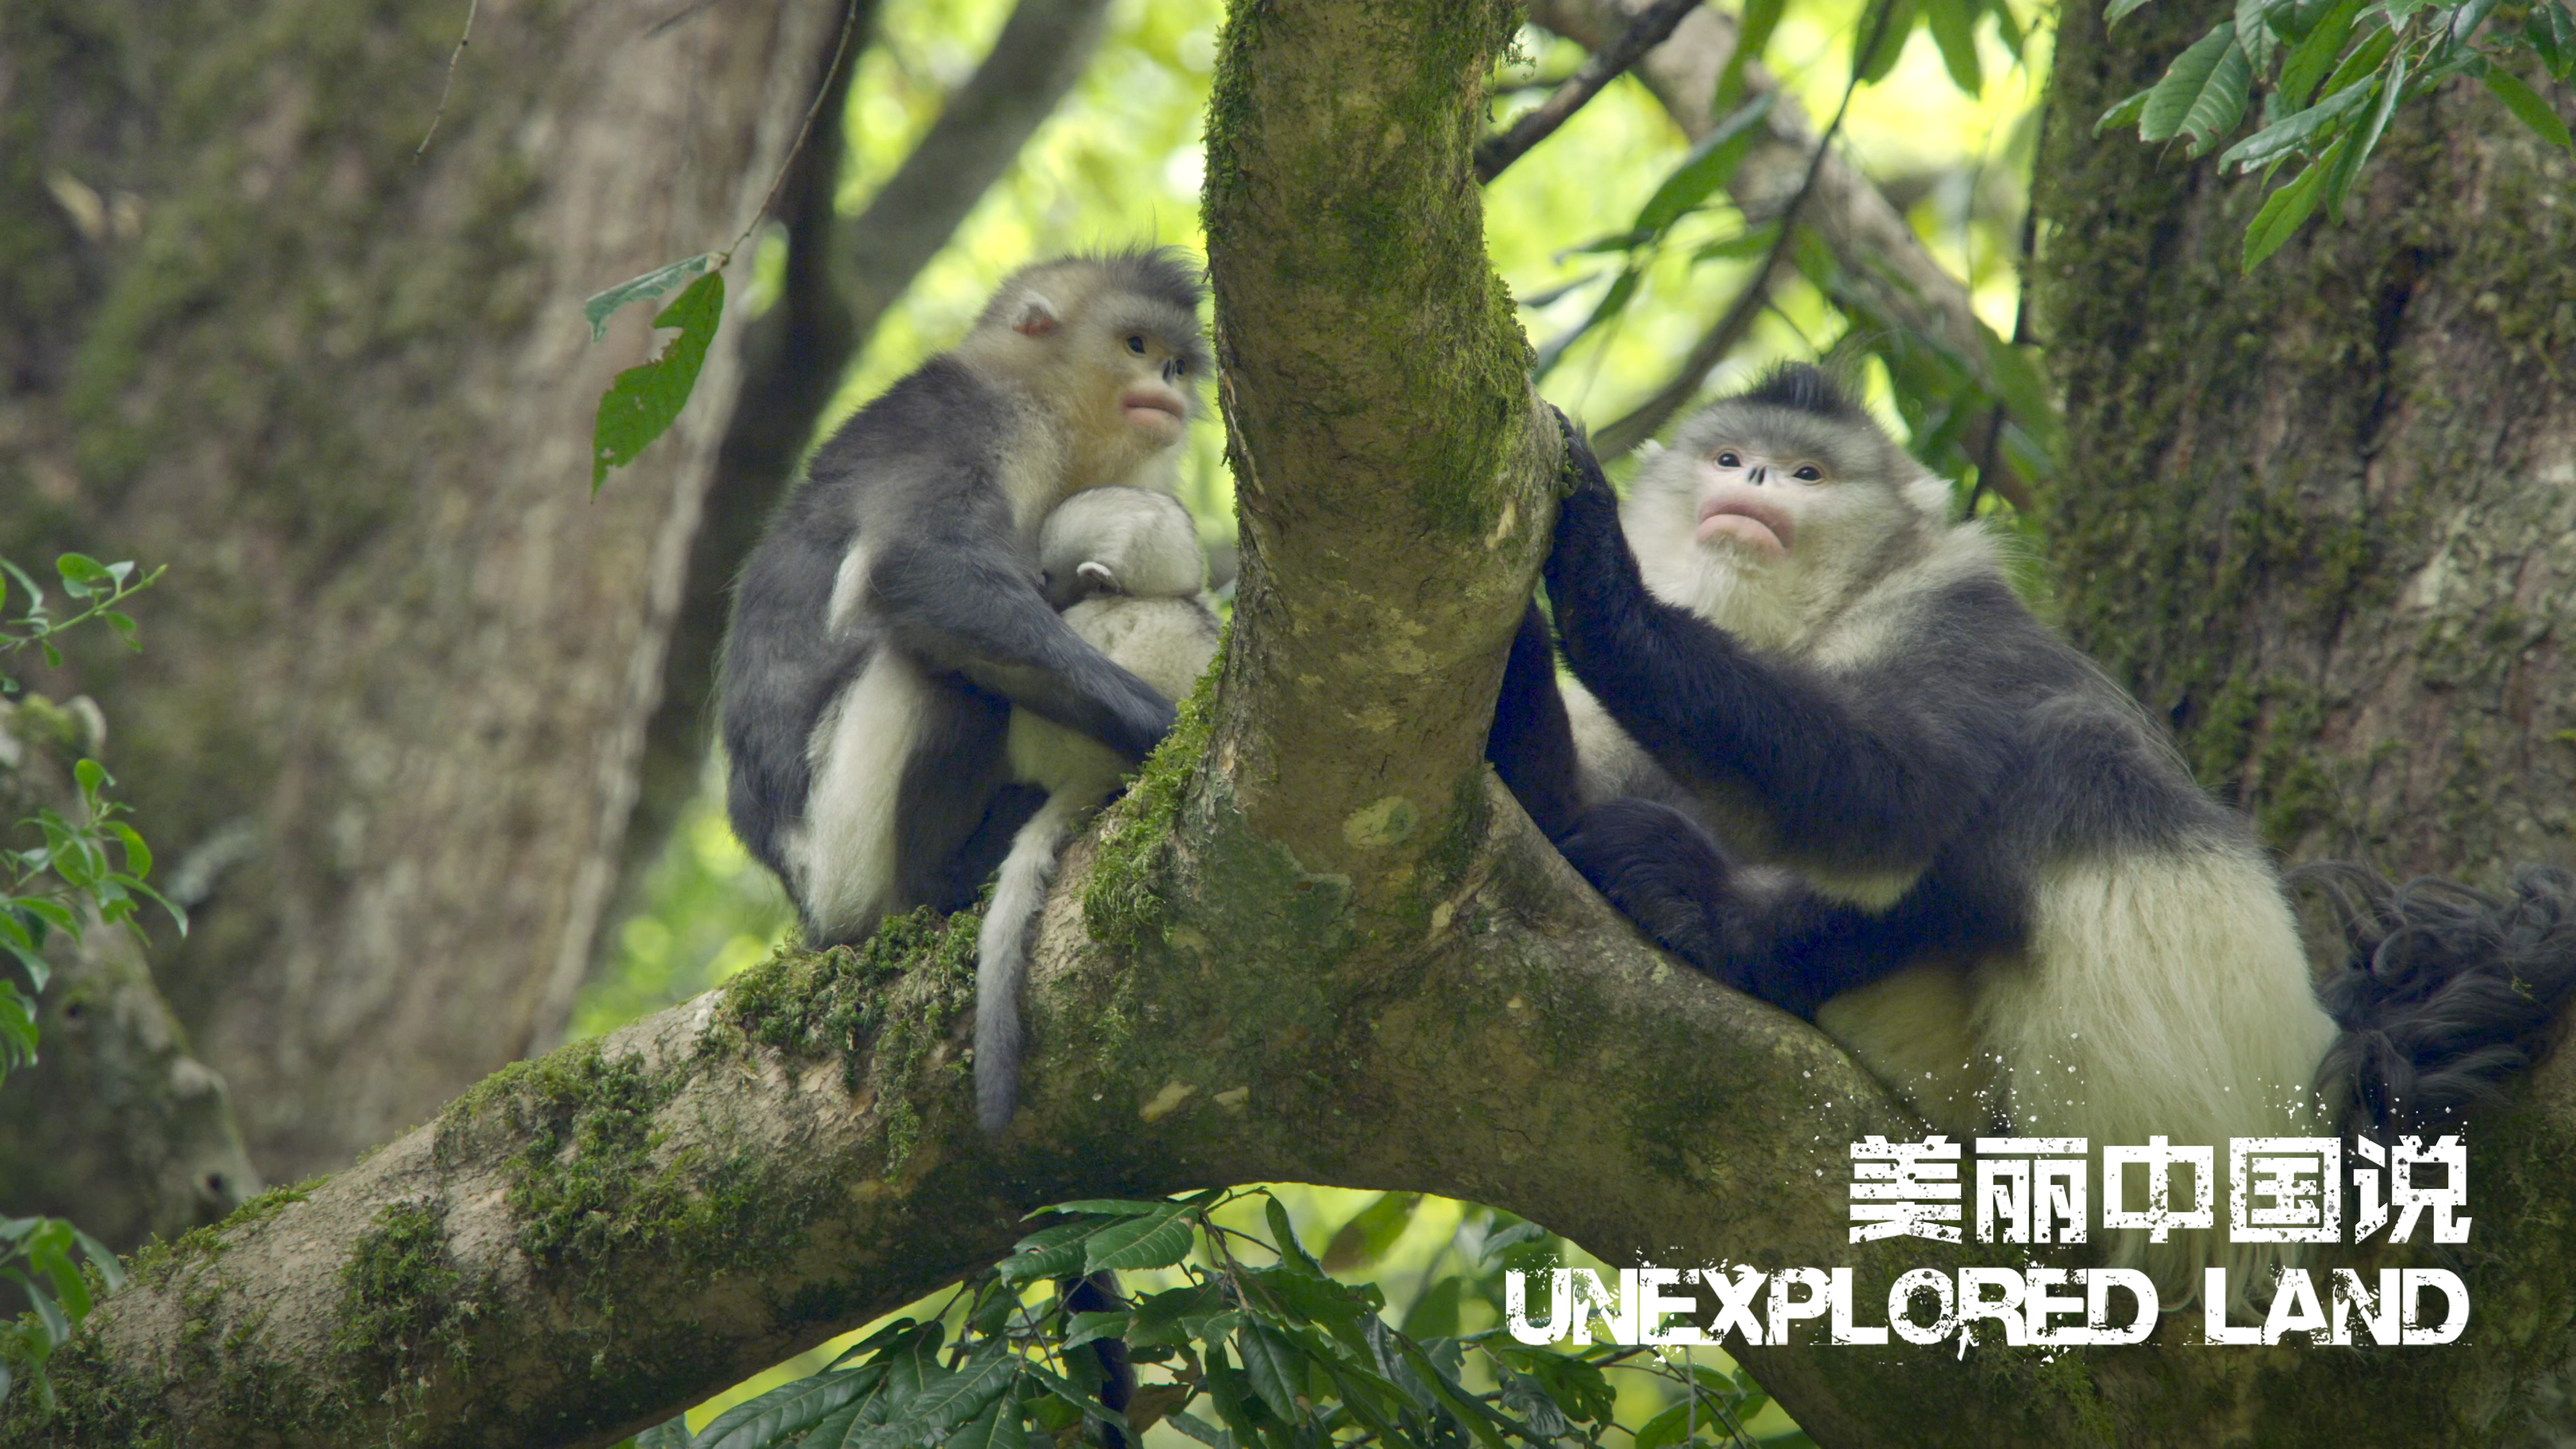 Unexplored Land: Exhausted monkey mom and her energetic baby